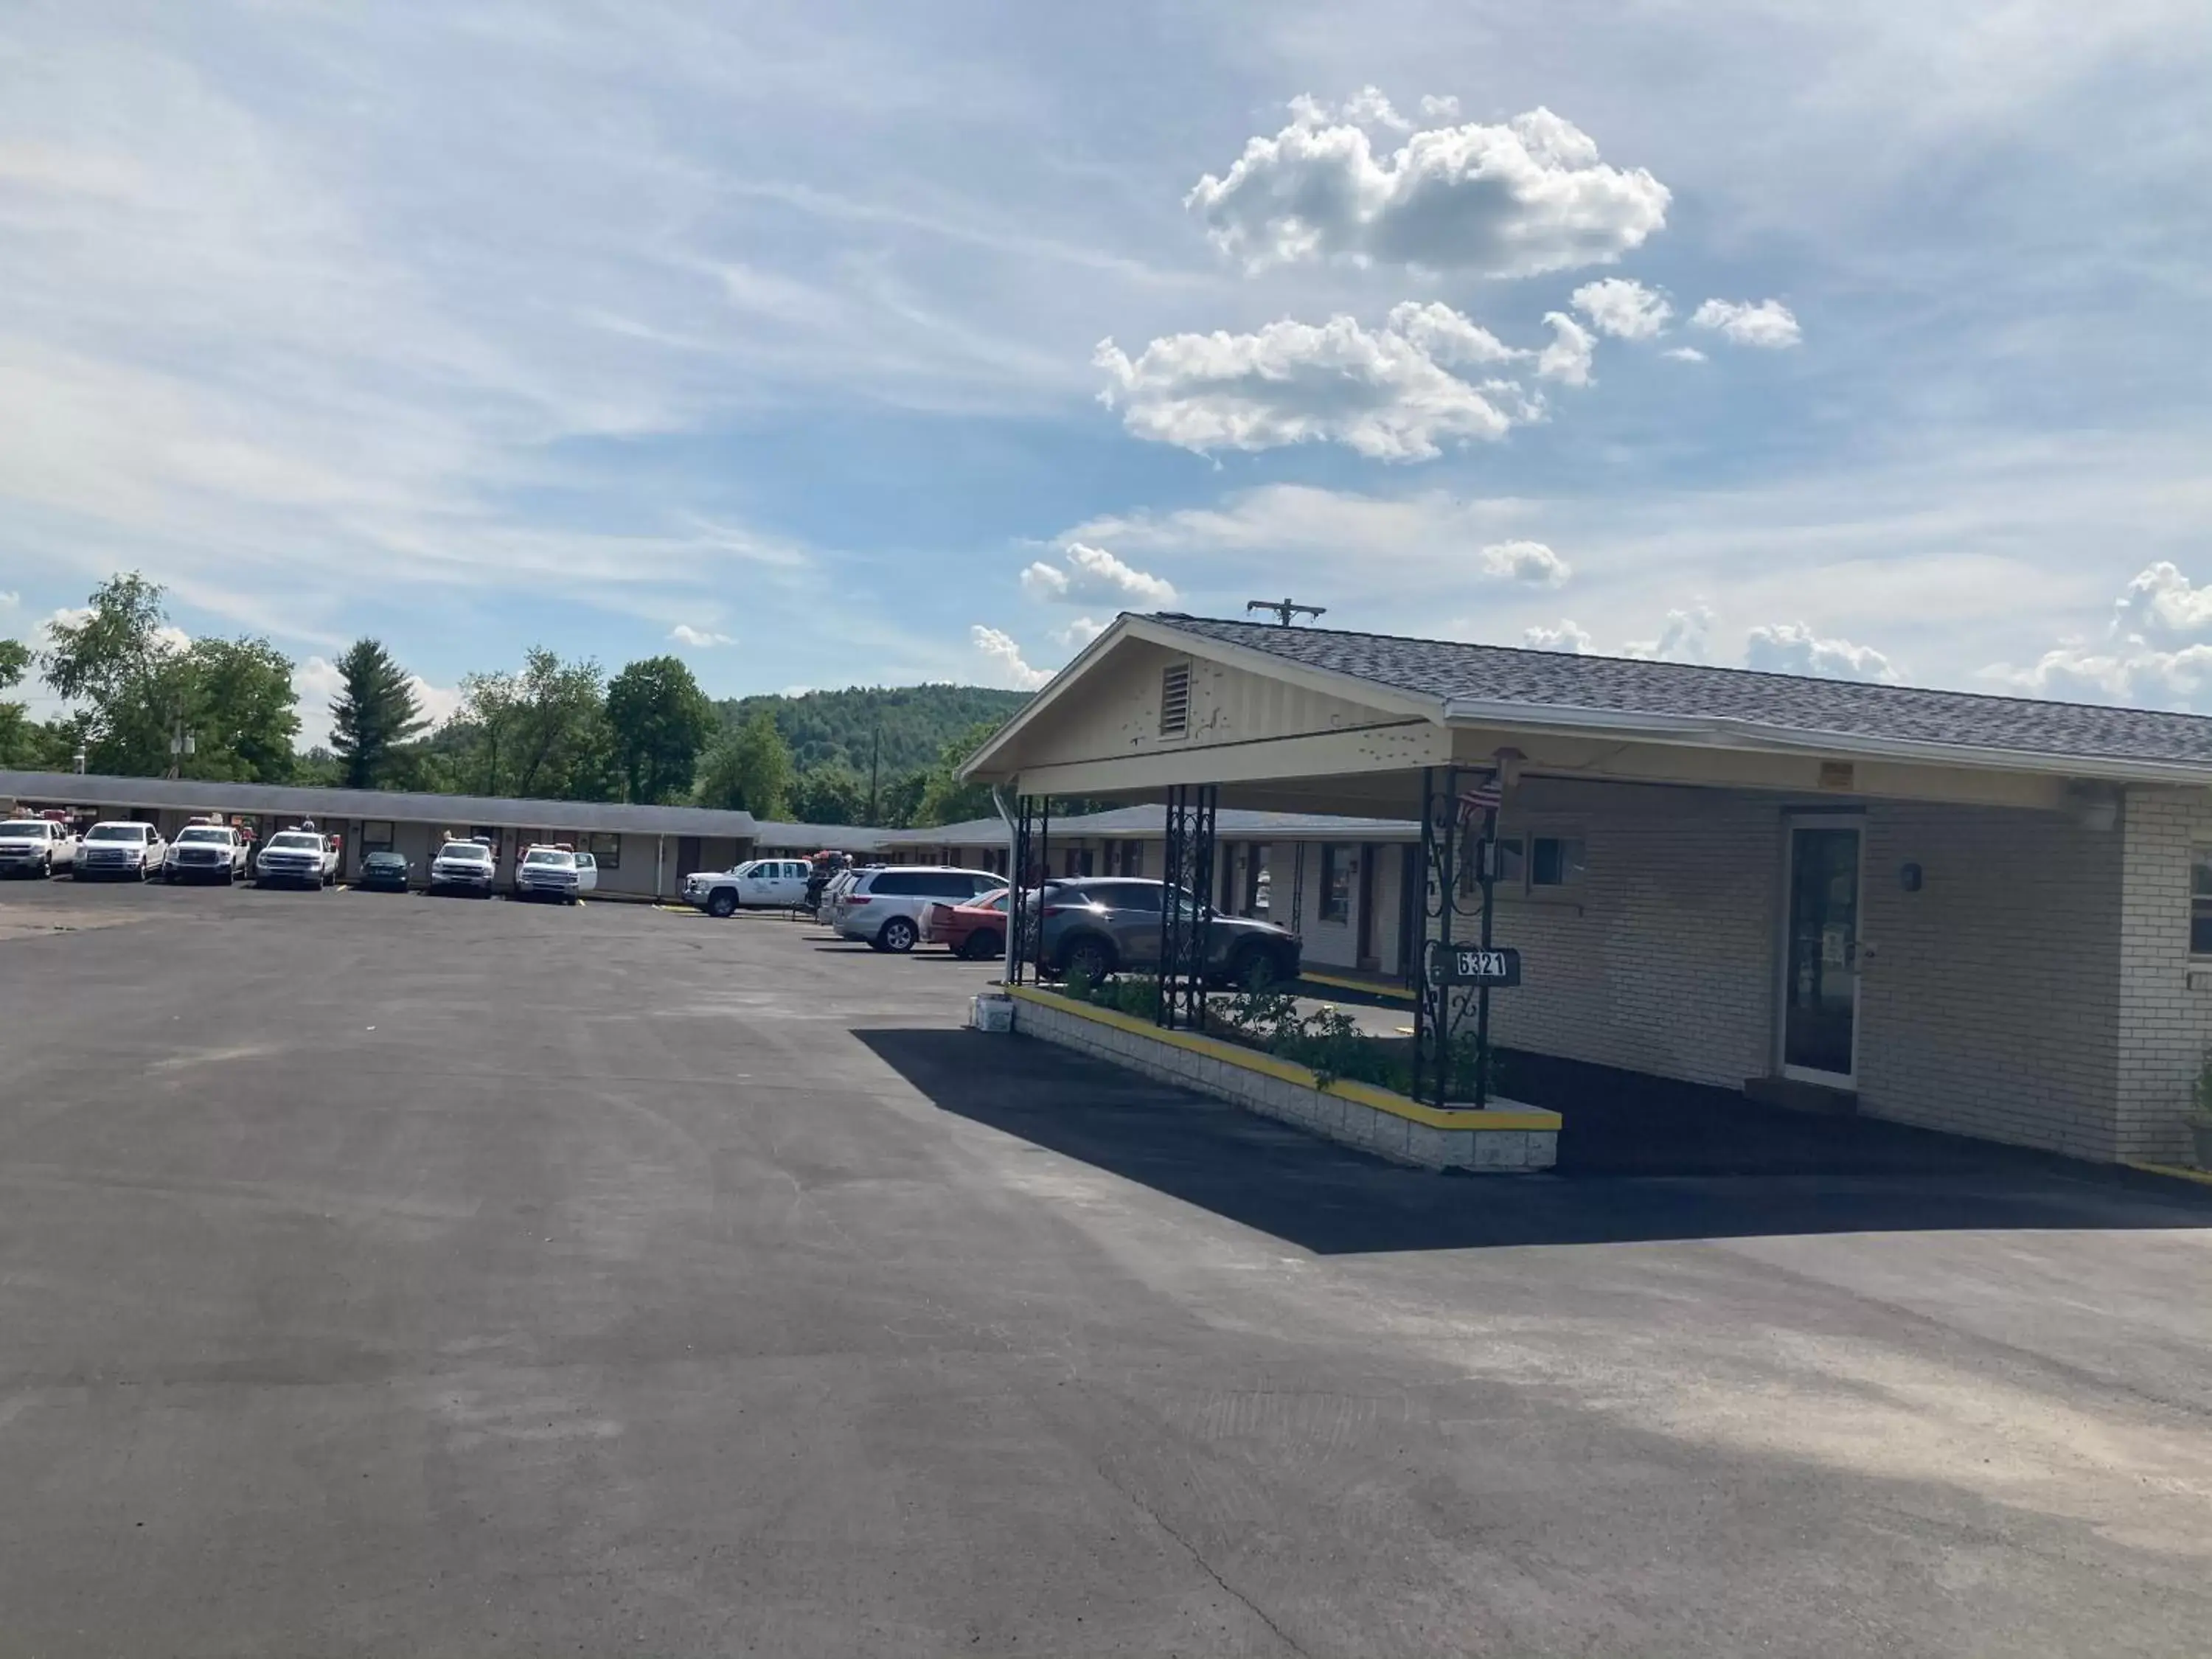 Property Building in Budget Inn Clearfield PA